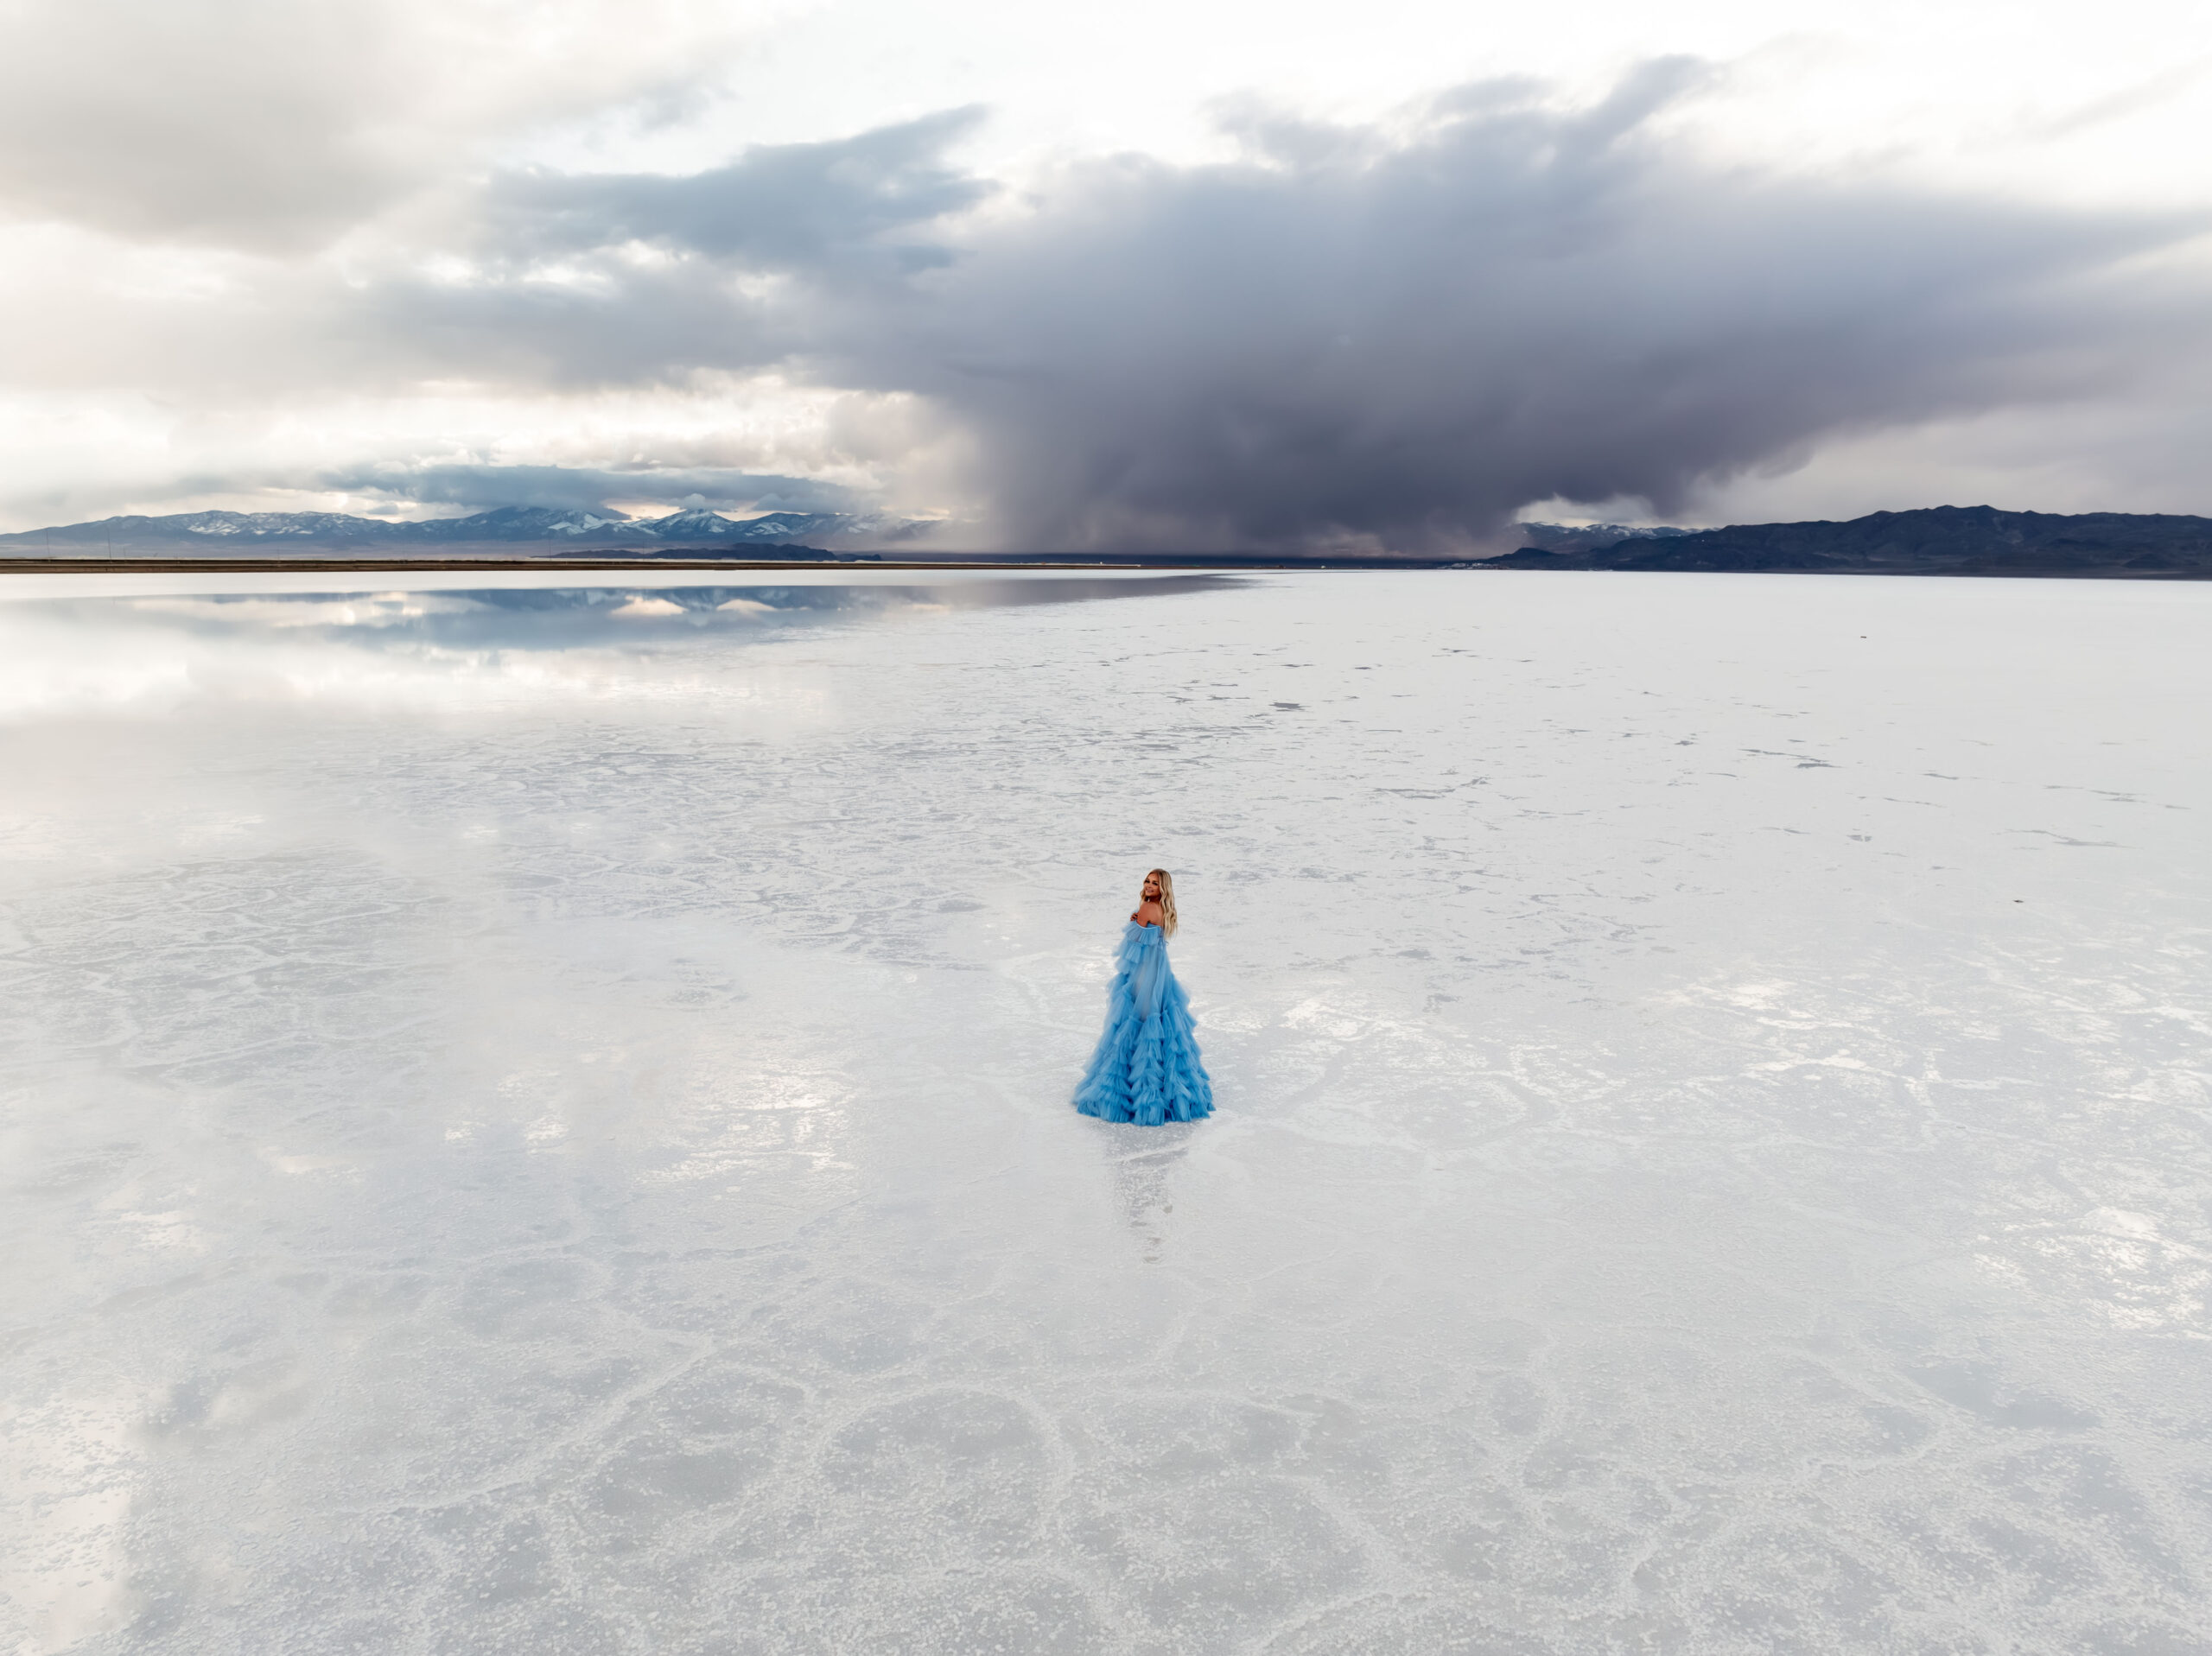 Dreamy landscape of the Utah Salt Flats featuring a woman in a fairy-tale blue dress, blending with the horizon.